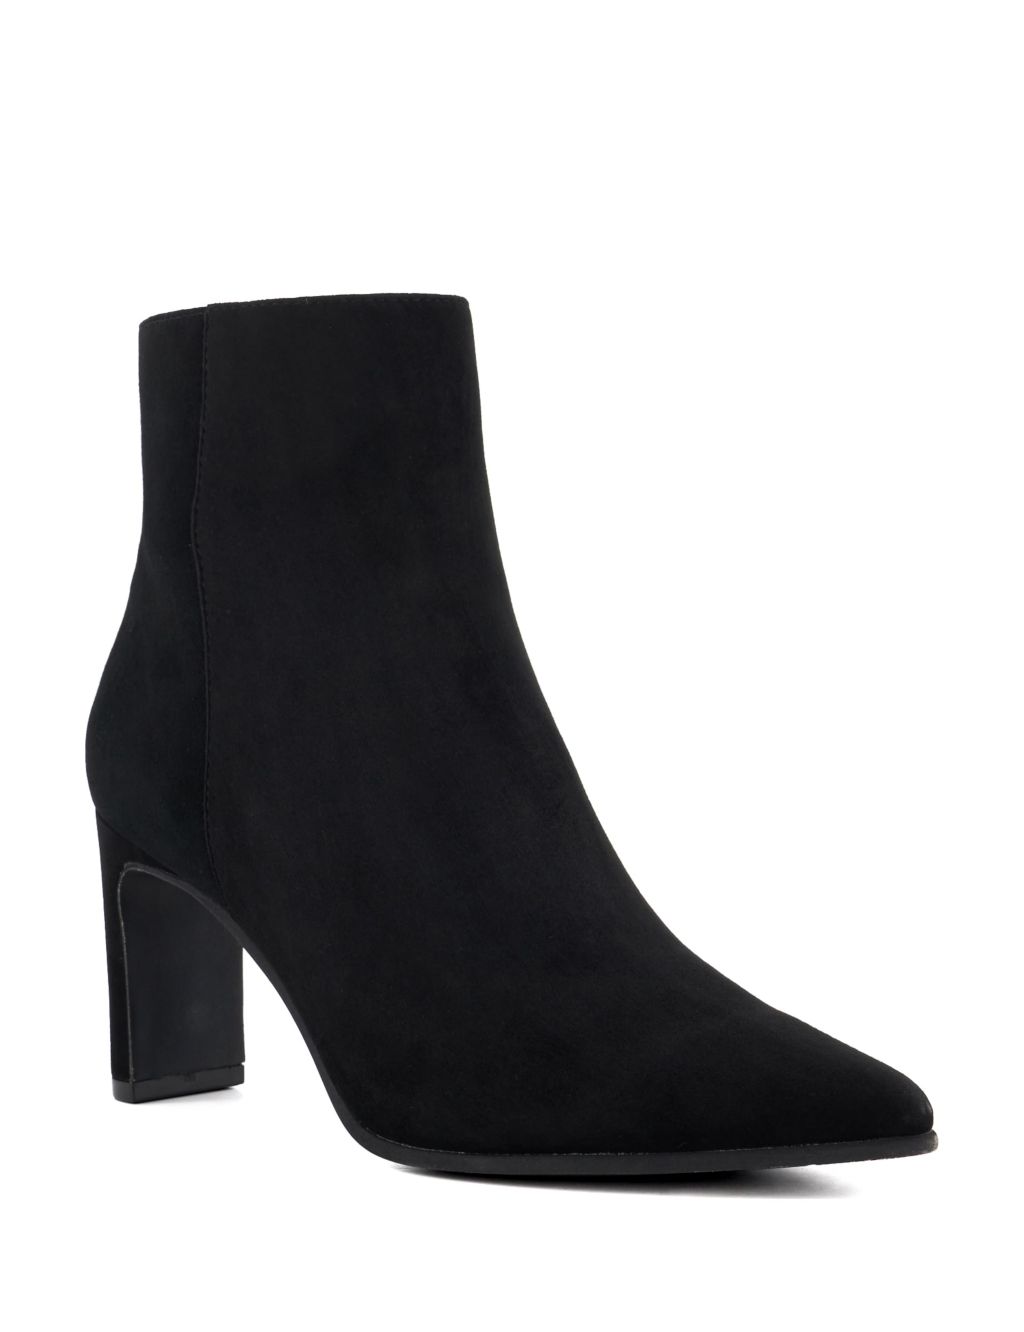 Suede Block Heel Pointed Ankle Boots image 2